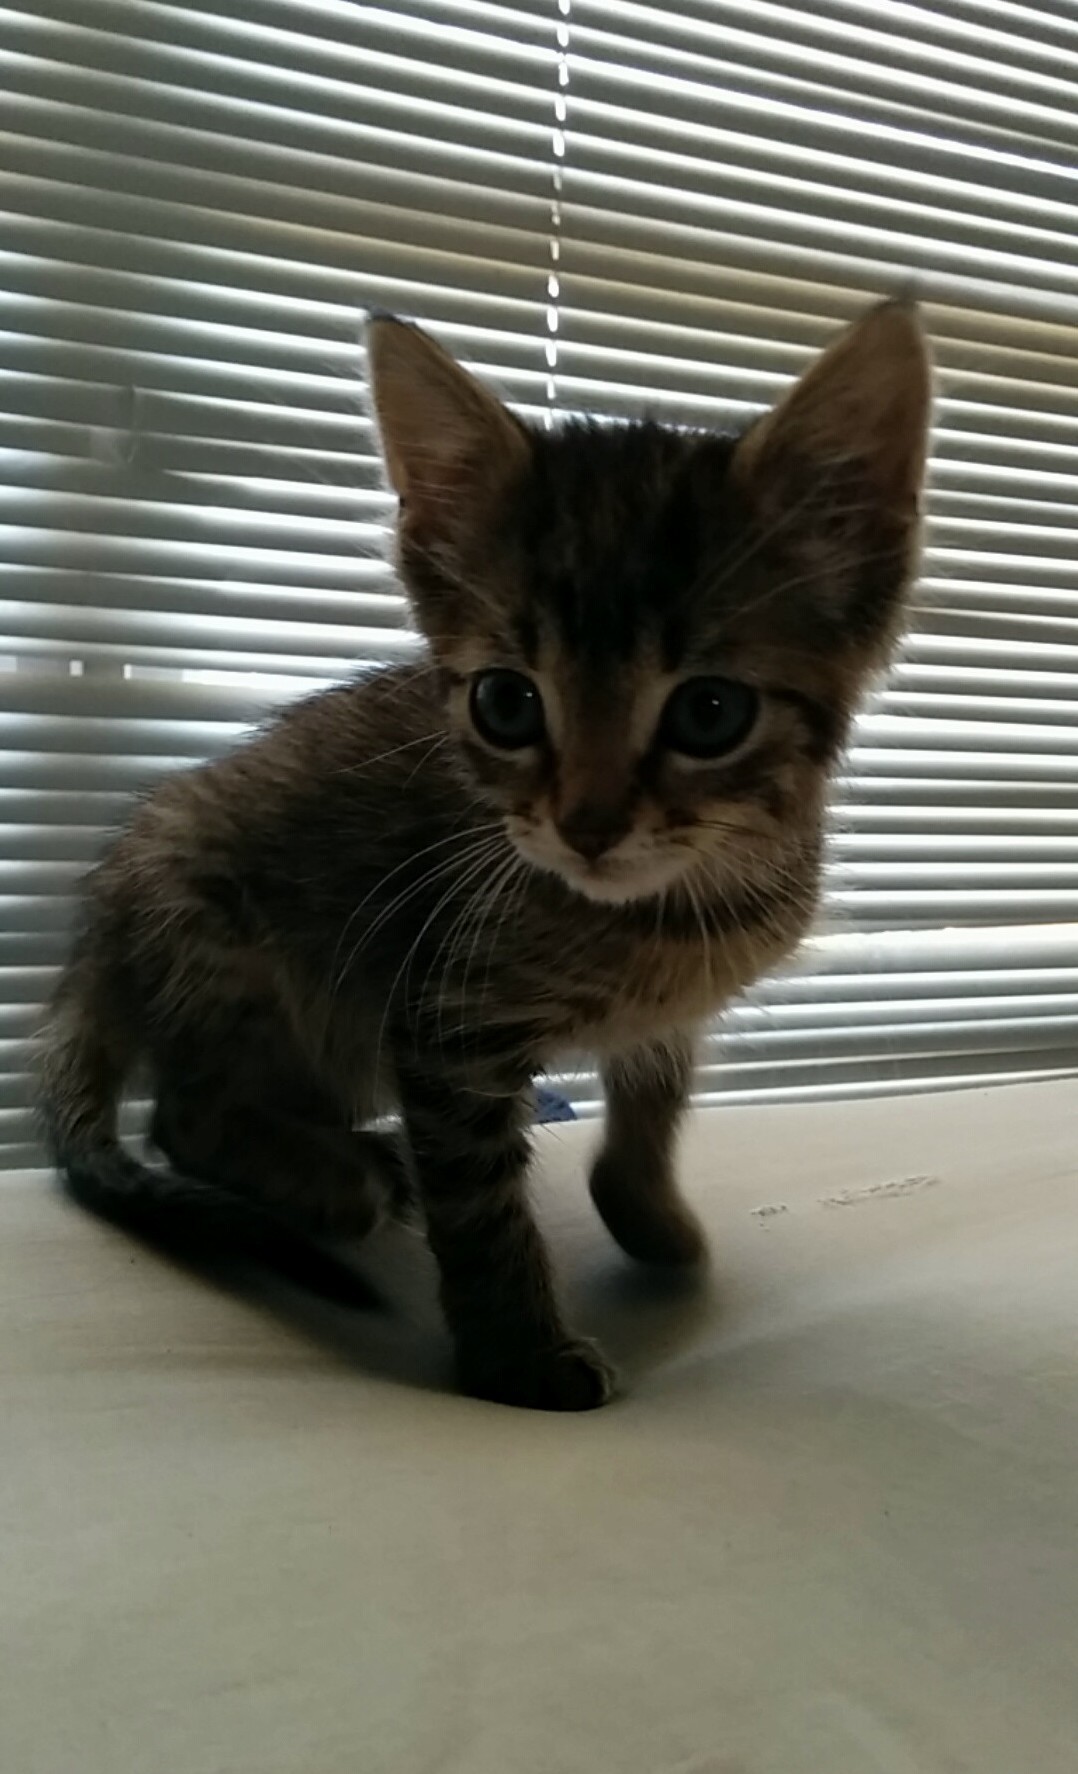 My fianc and i are proud foster parents for this little miss